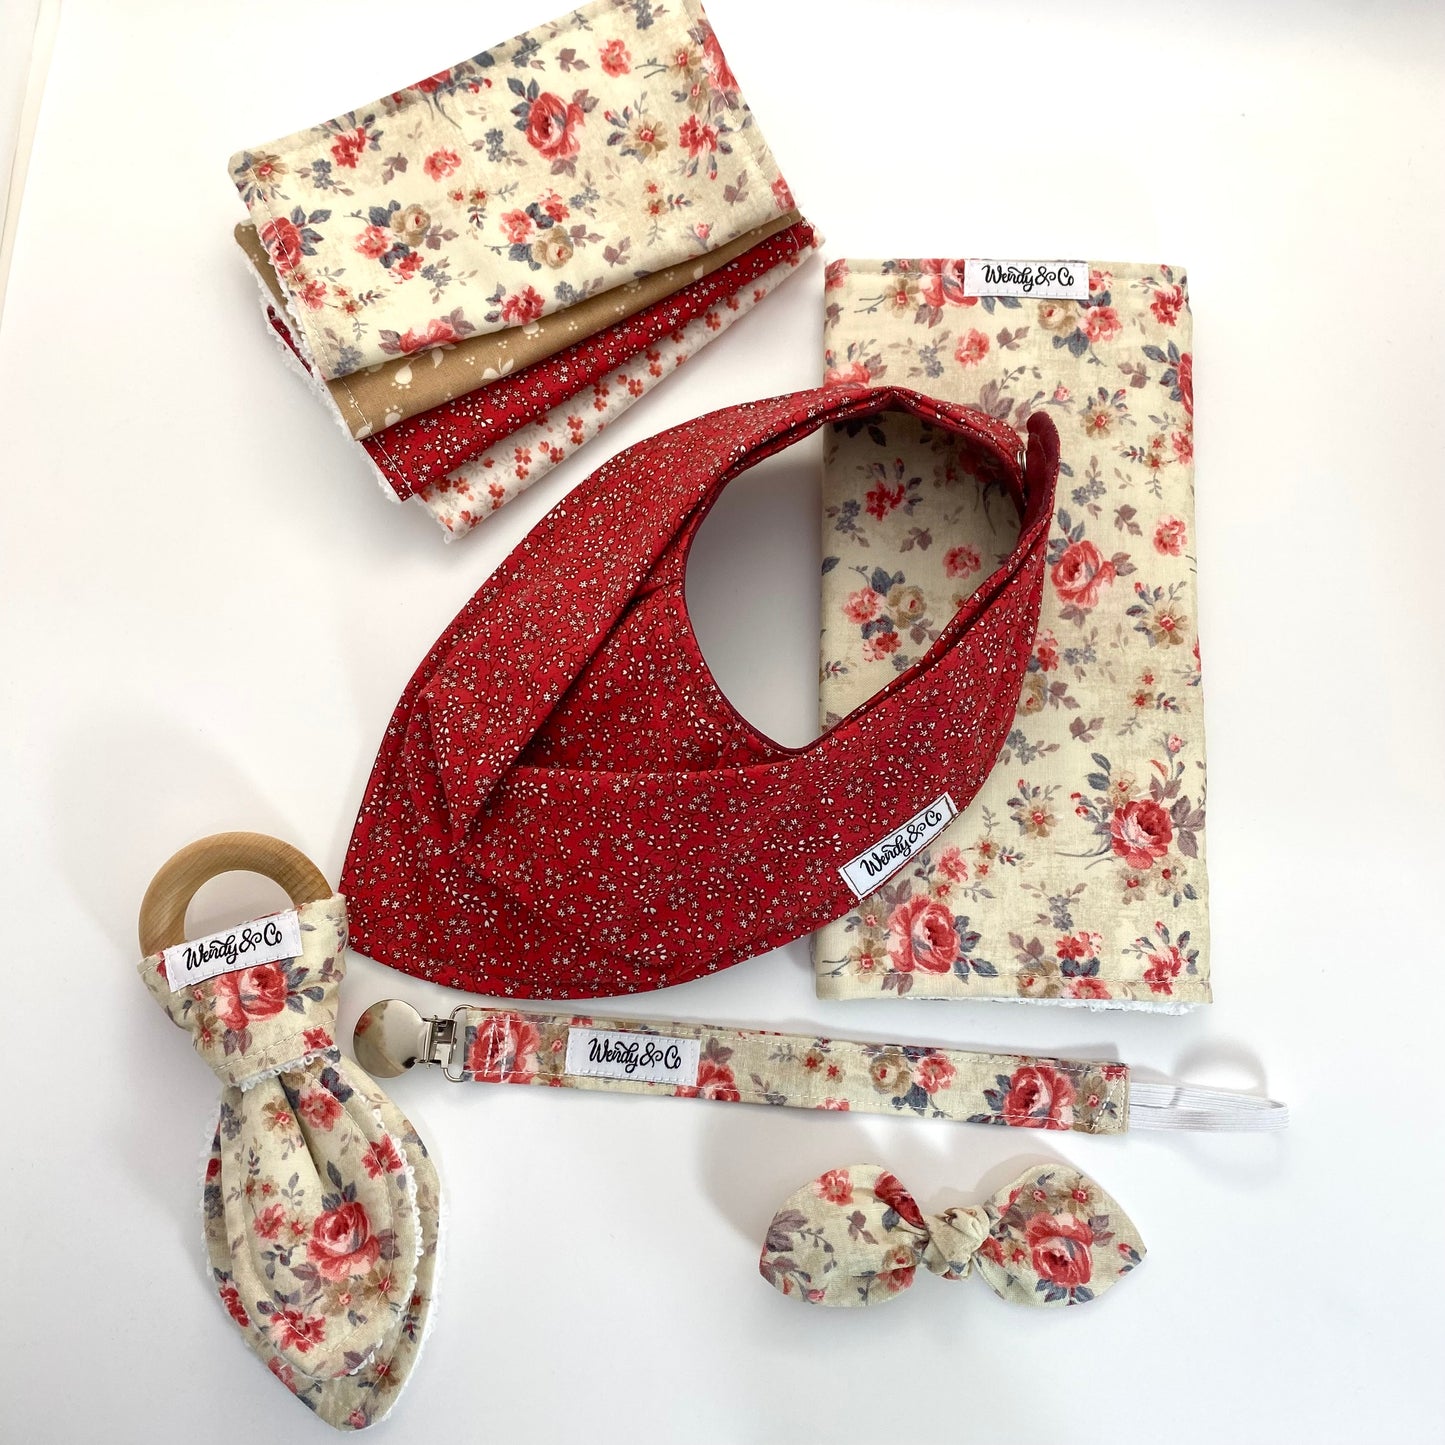 Baby gift set with washing cloths, bib, burp cloth, paci clip, bow and teether.